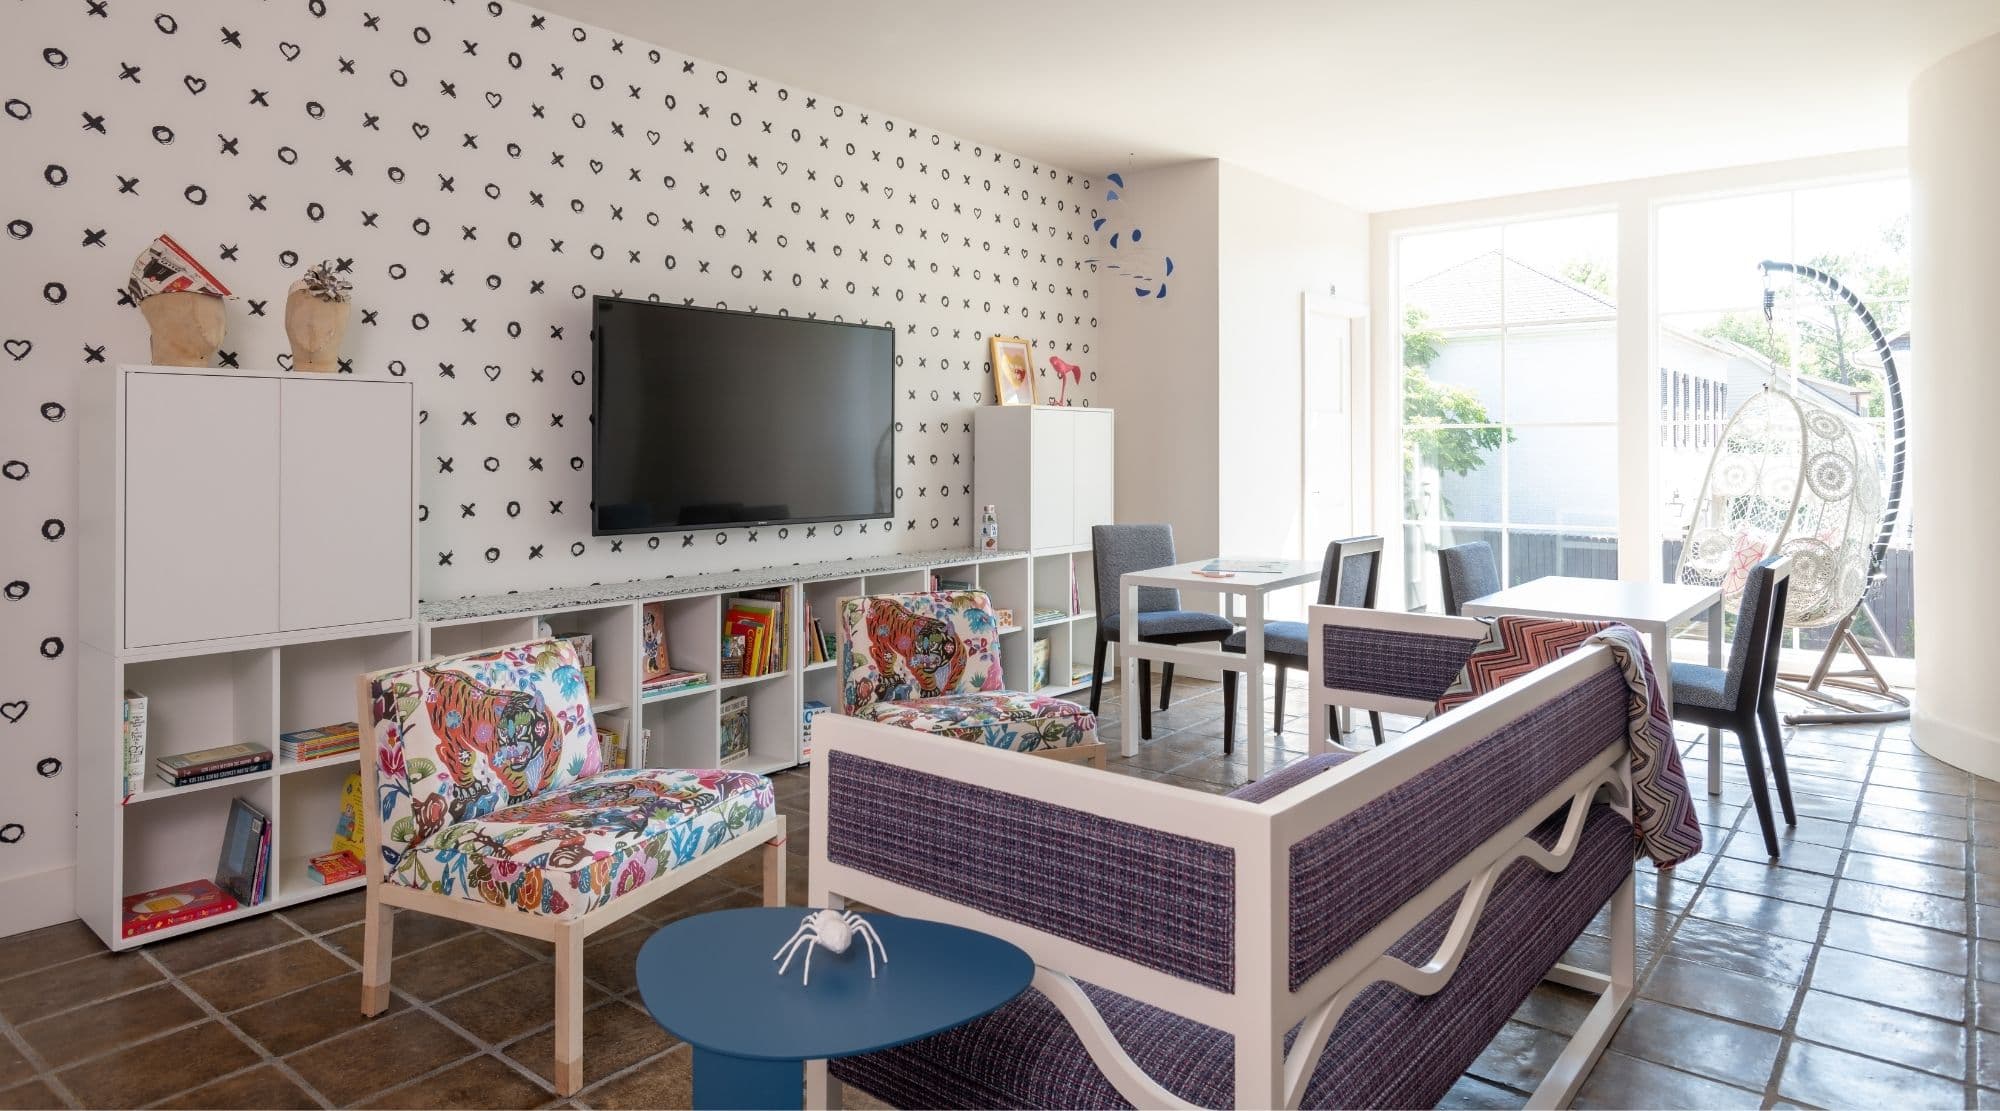 A colorful playroom with black and white wallpaper and lots of storage